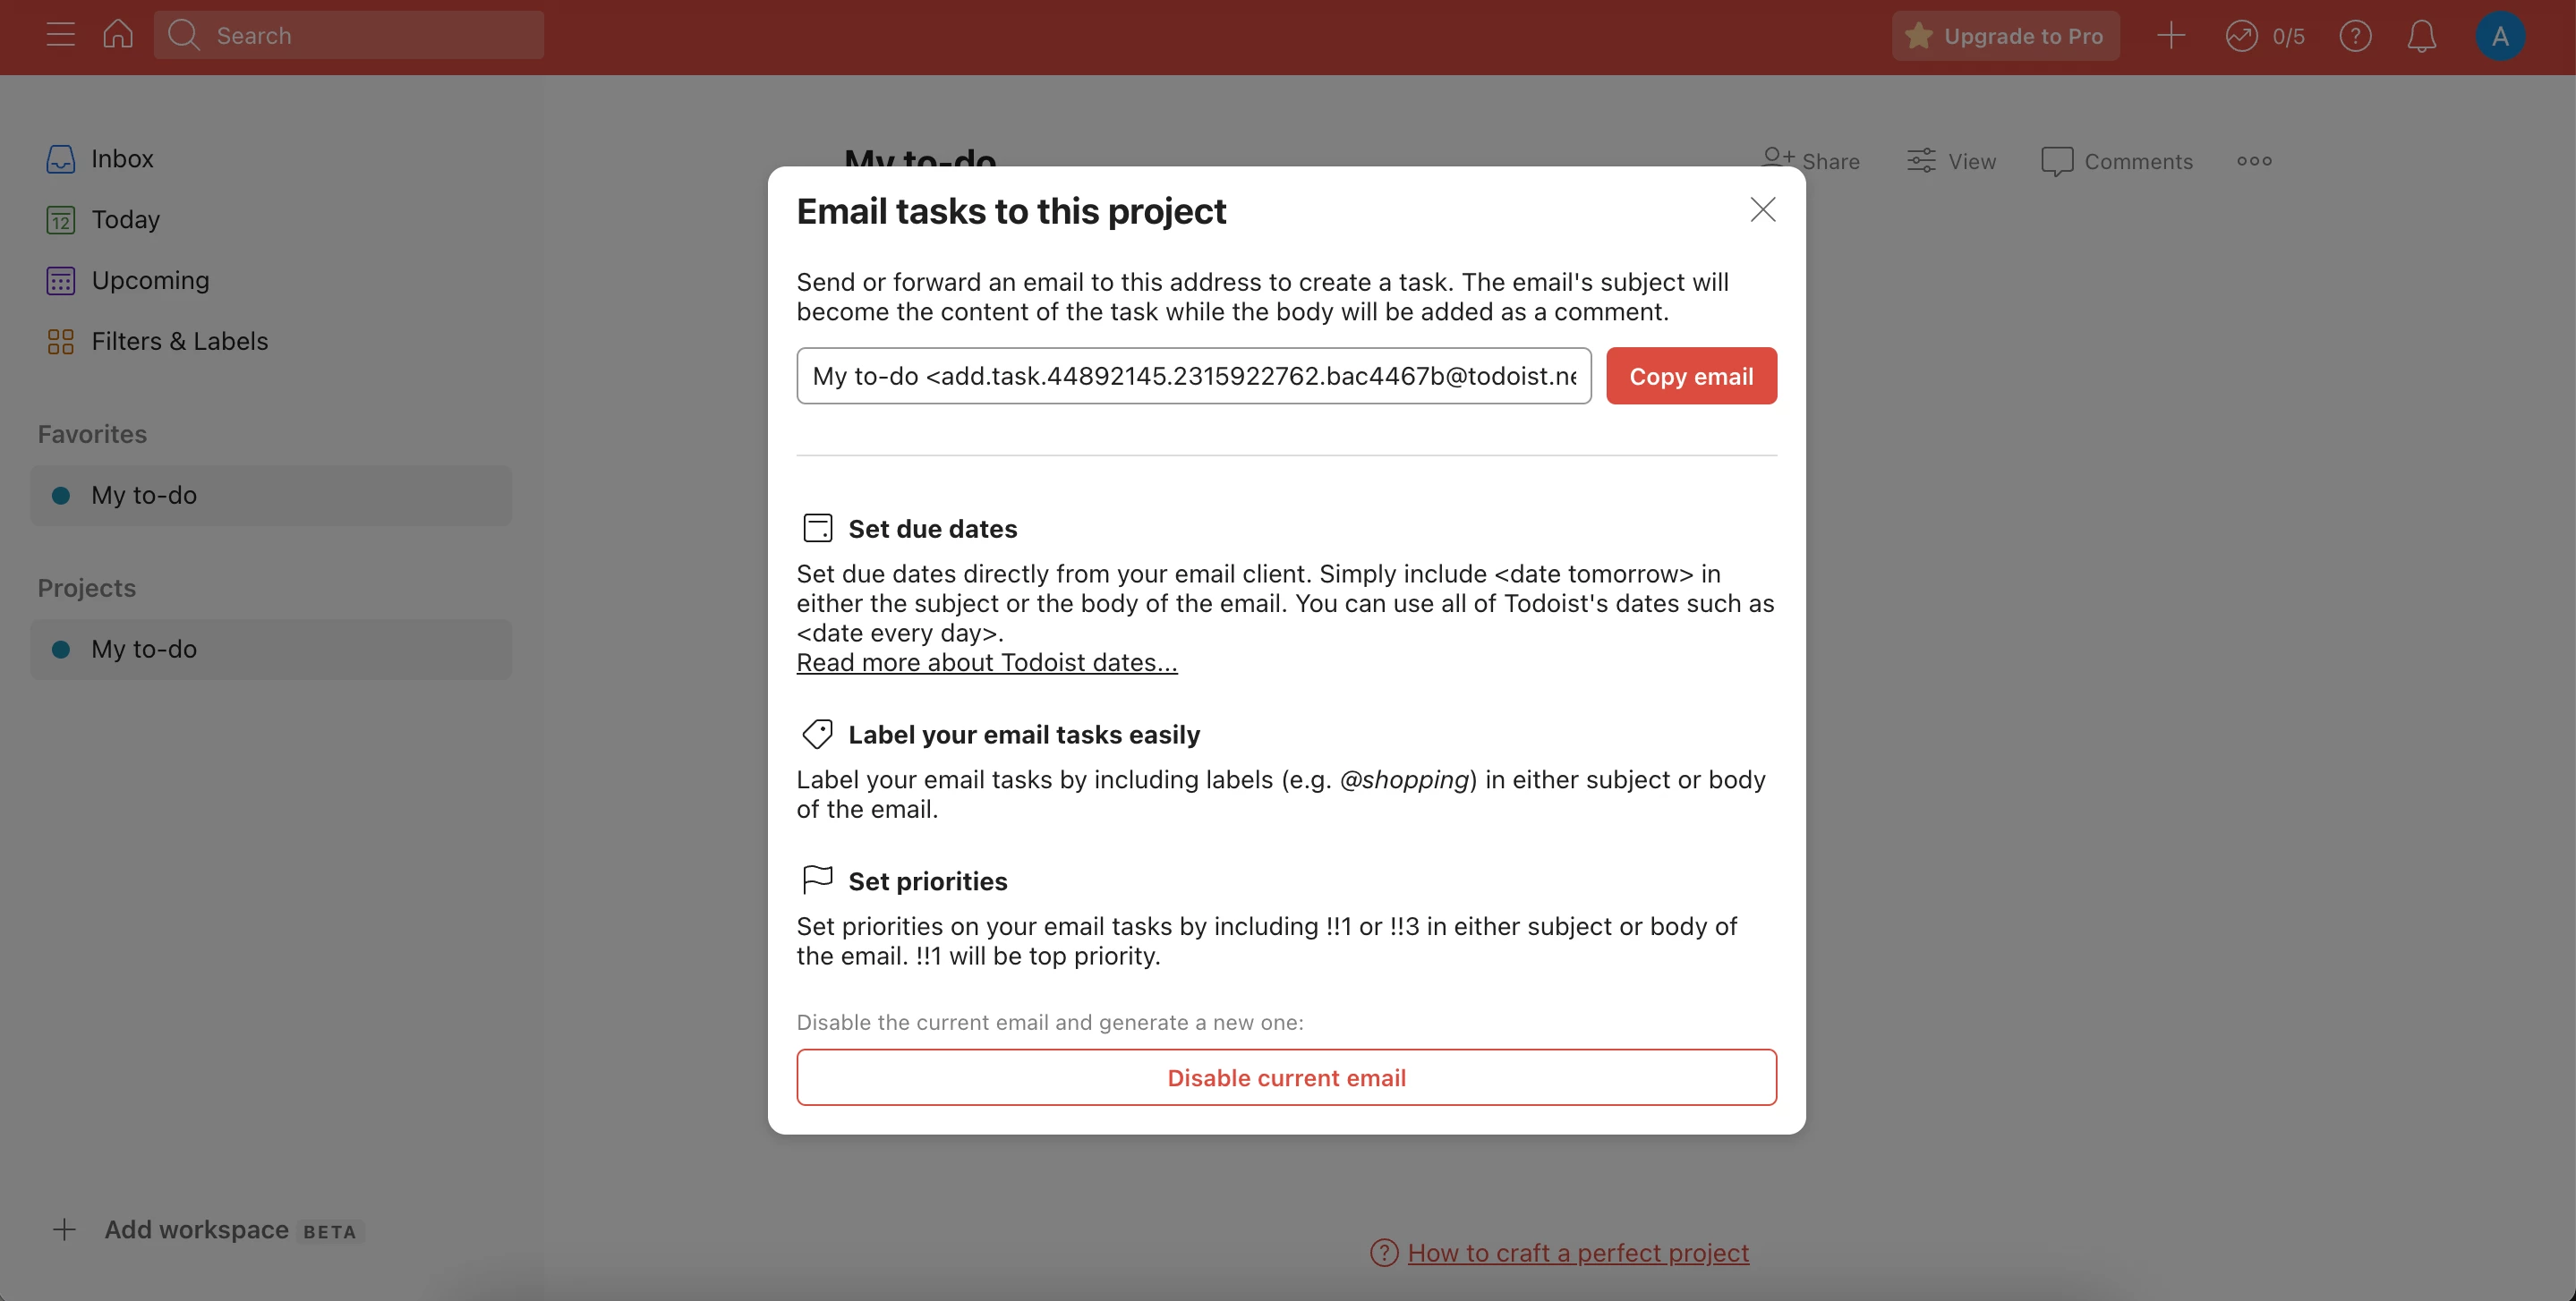 Todoist app with the ability to email tasks to a project. 